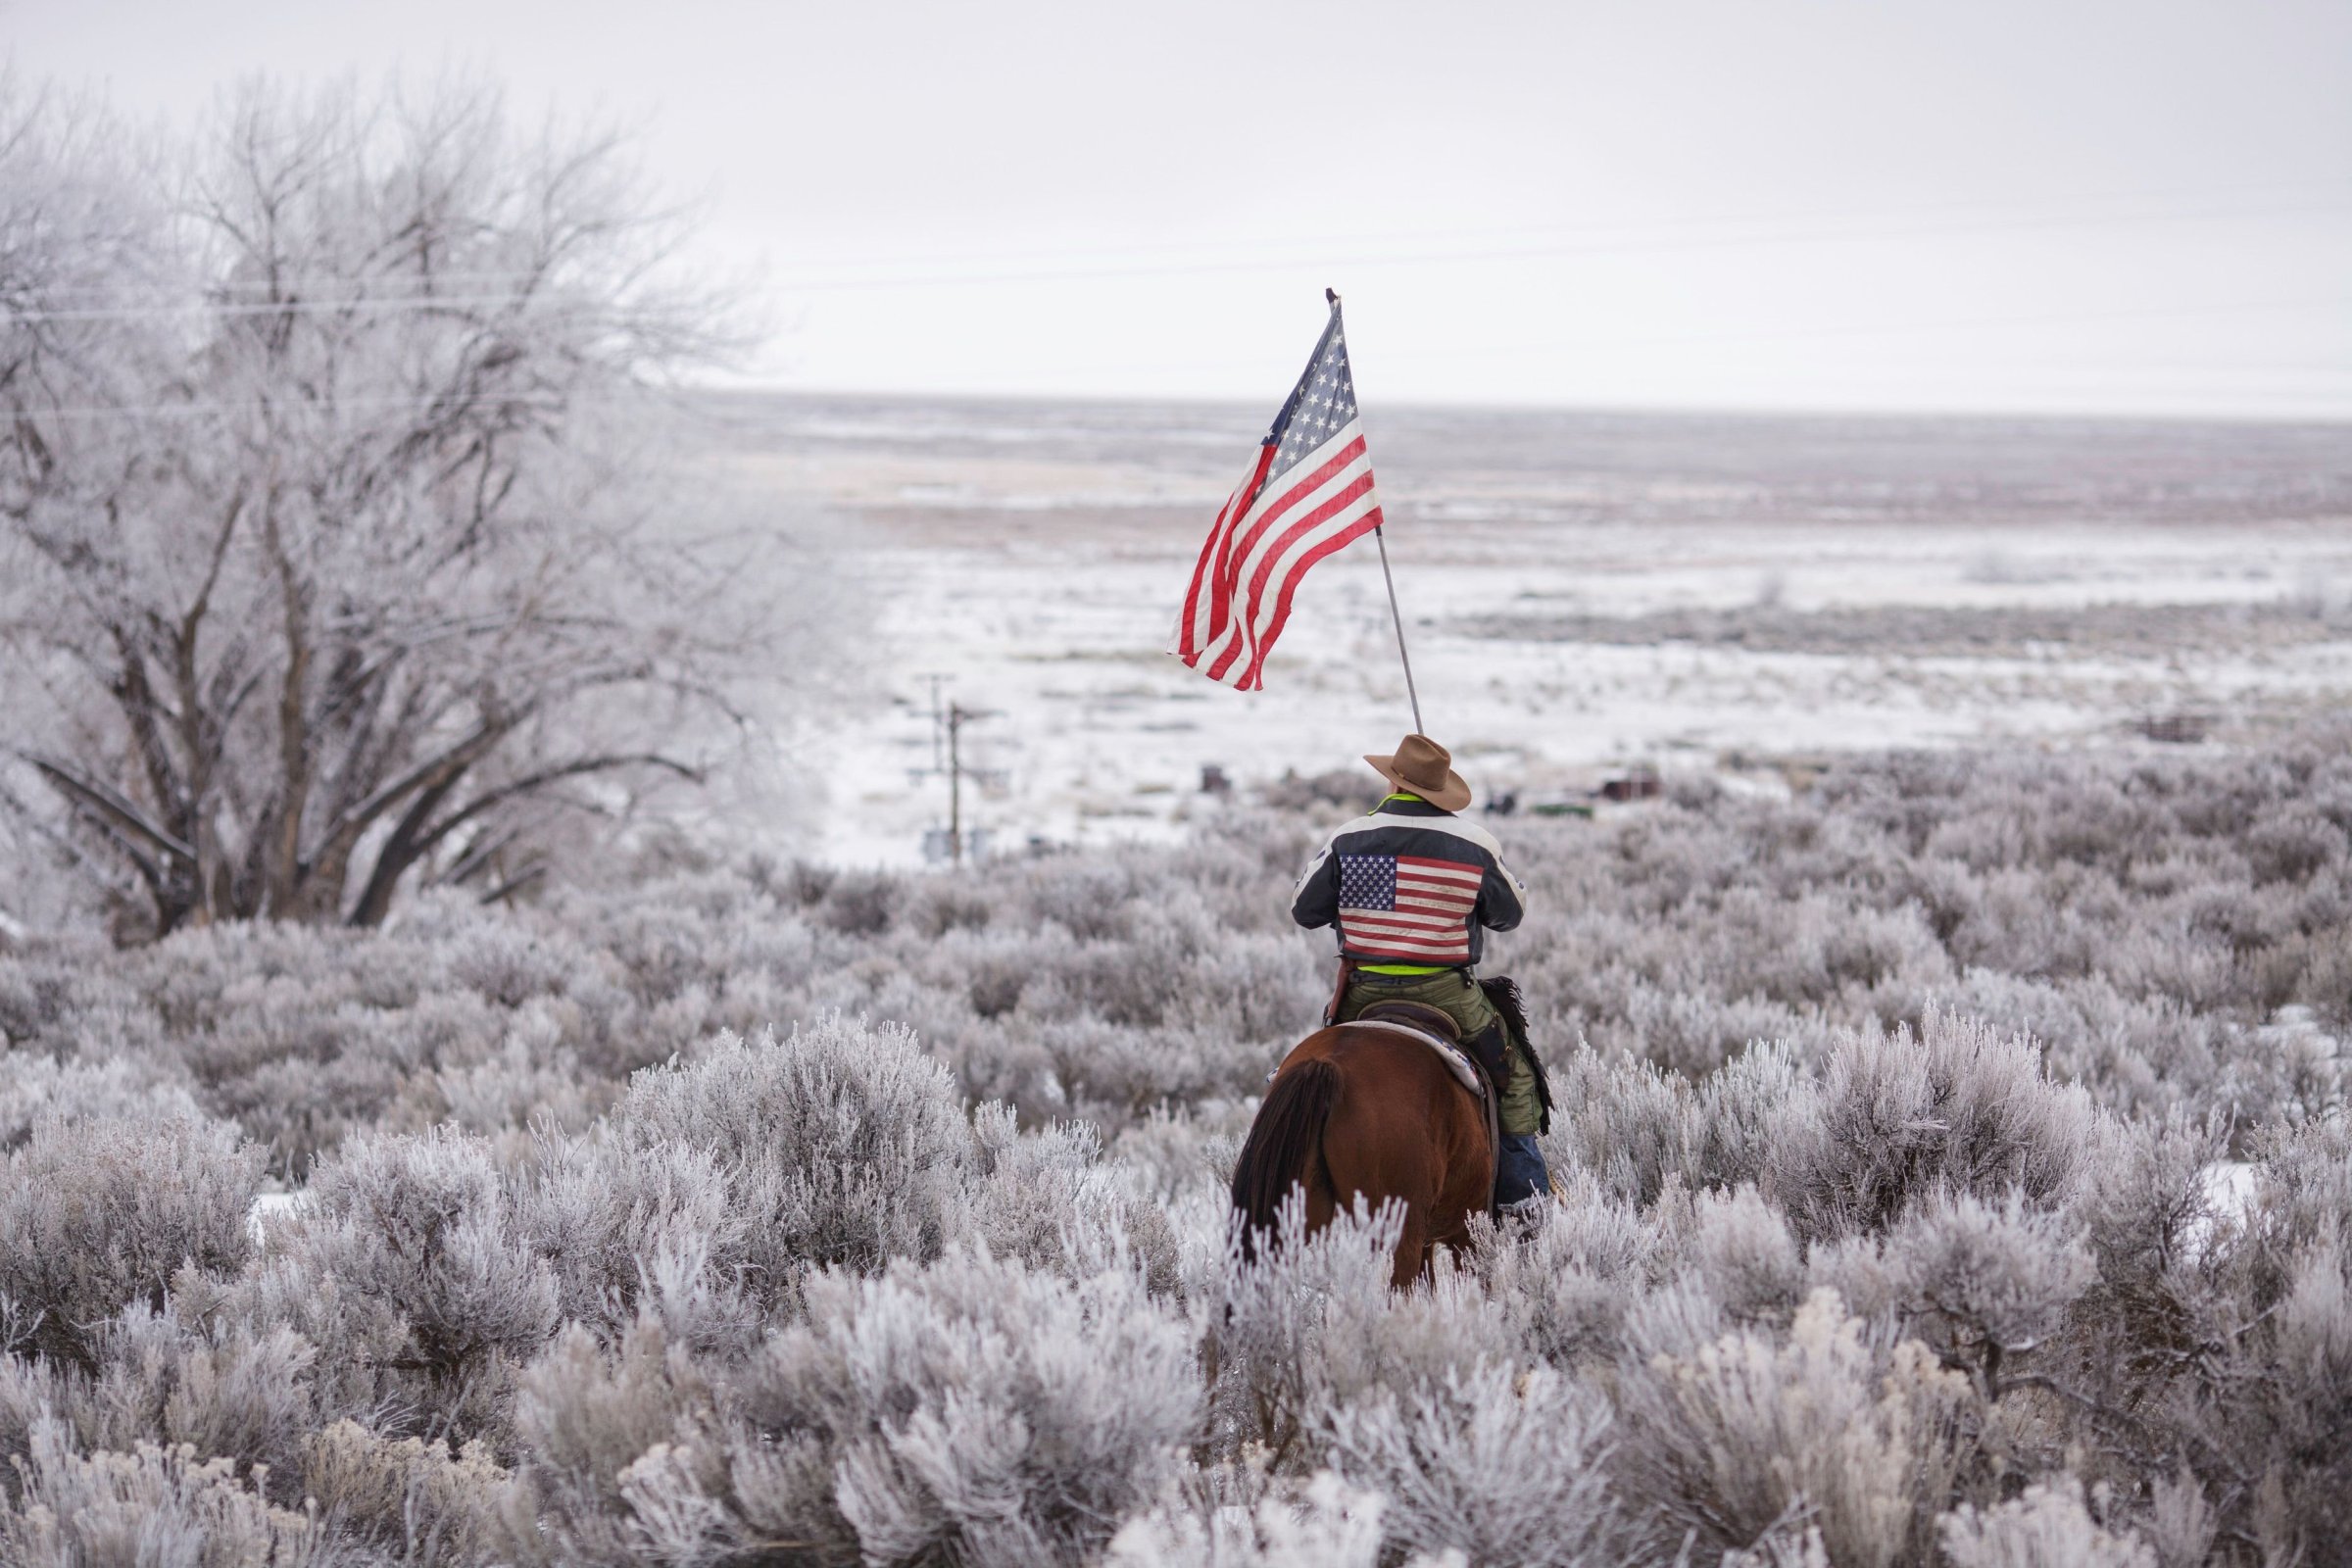 A man rides a horse at the occupied Malheur National Wildlife Refuge, on the sixth day of the occupation of the federal building, in Burns, Oregon, Jan. 7, 2016.